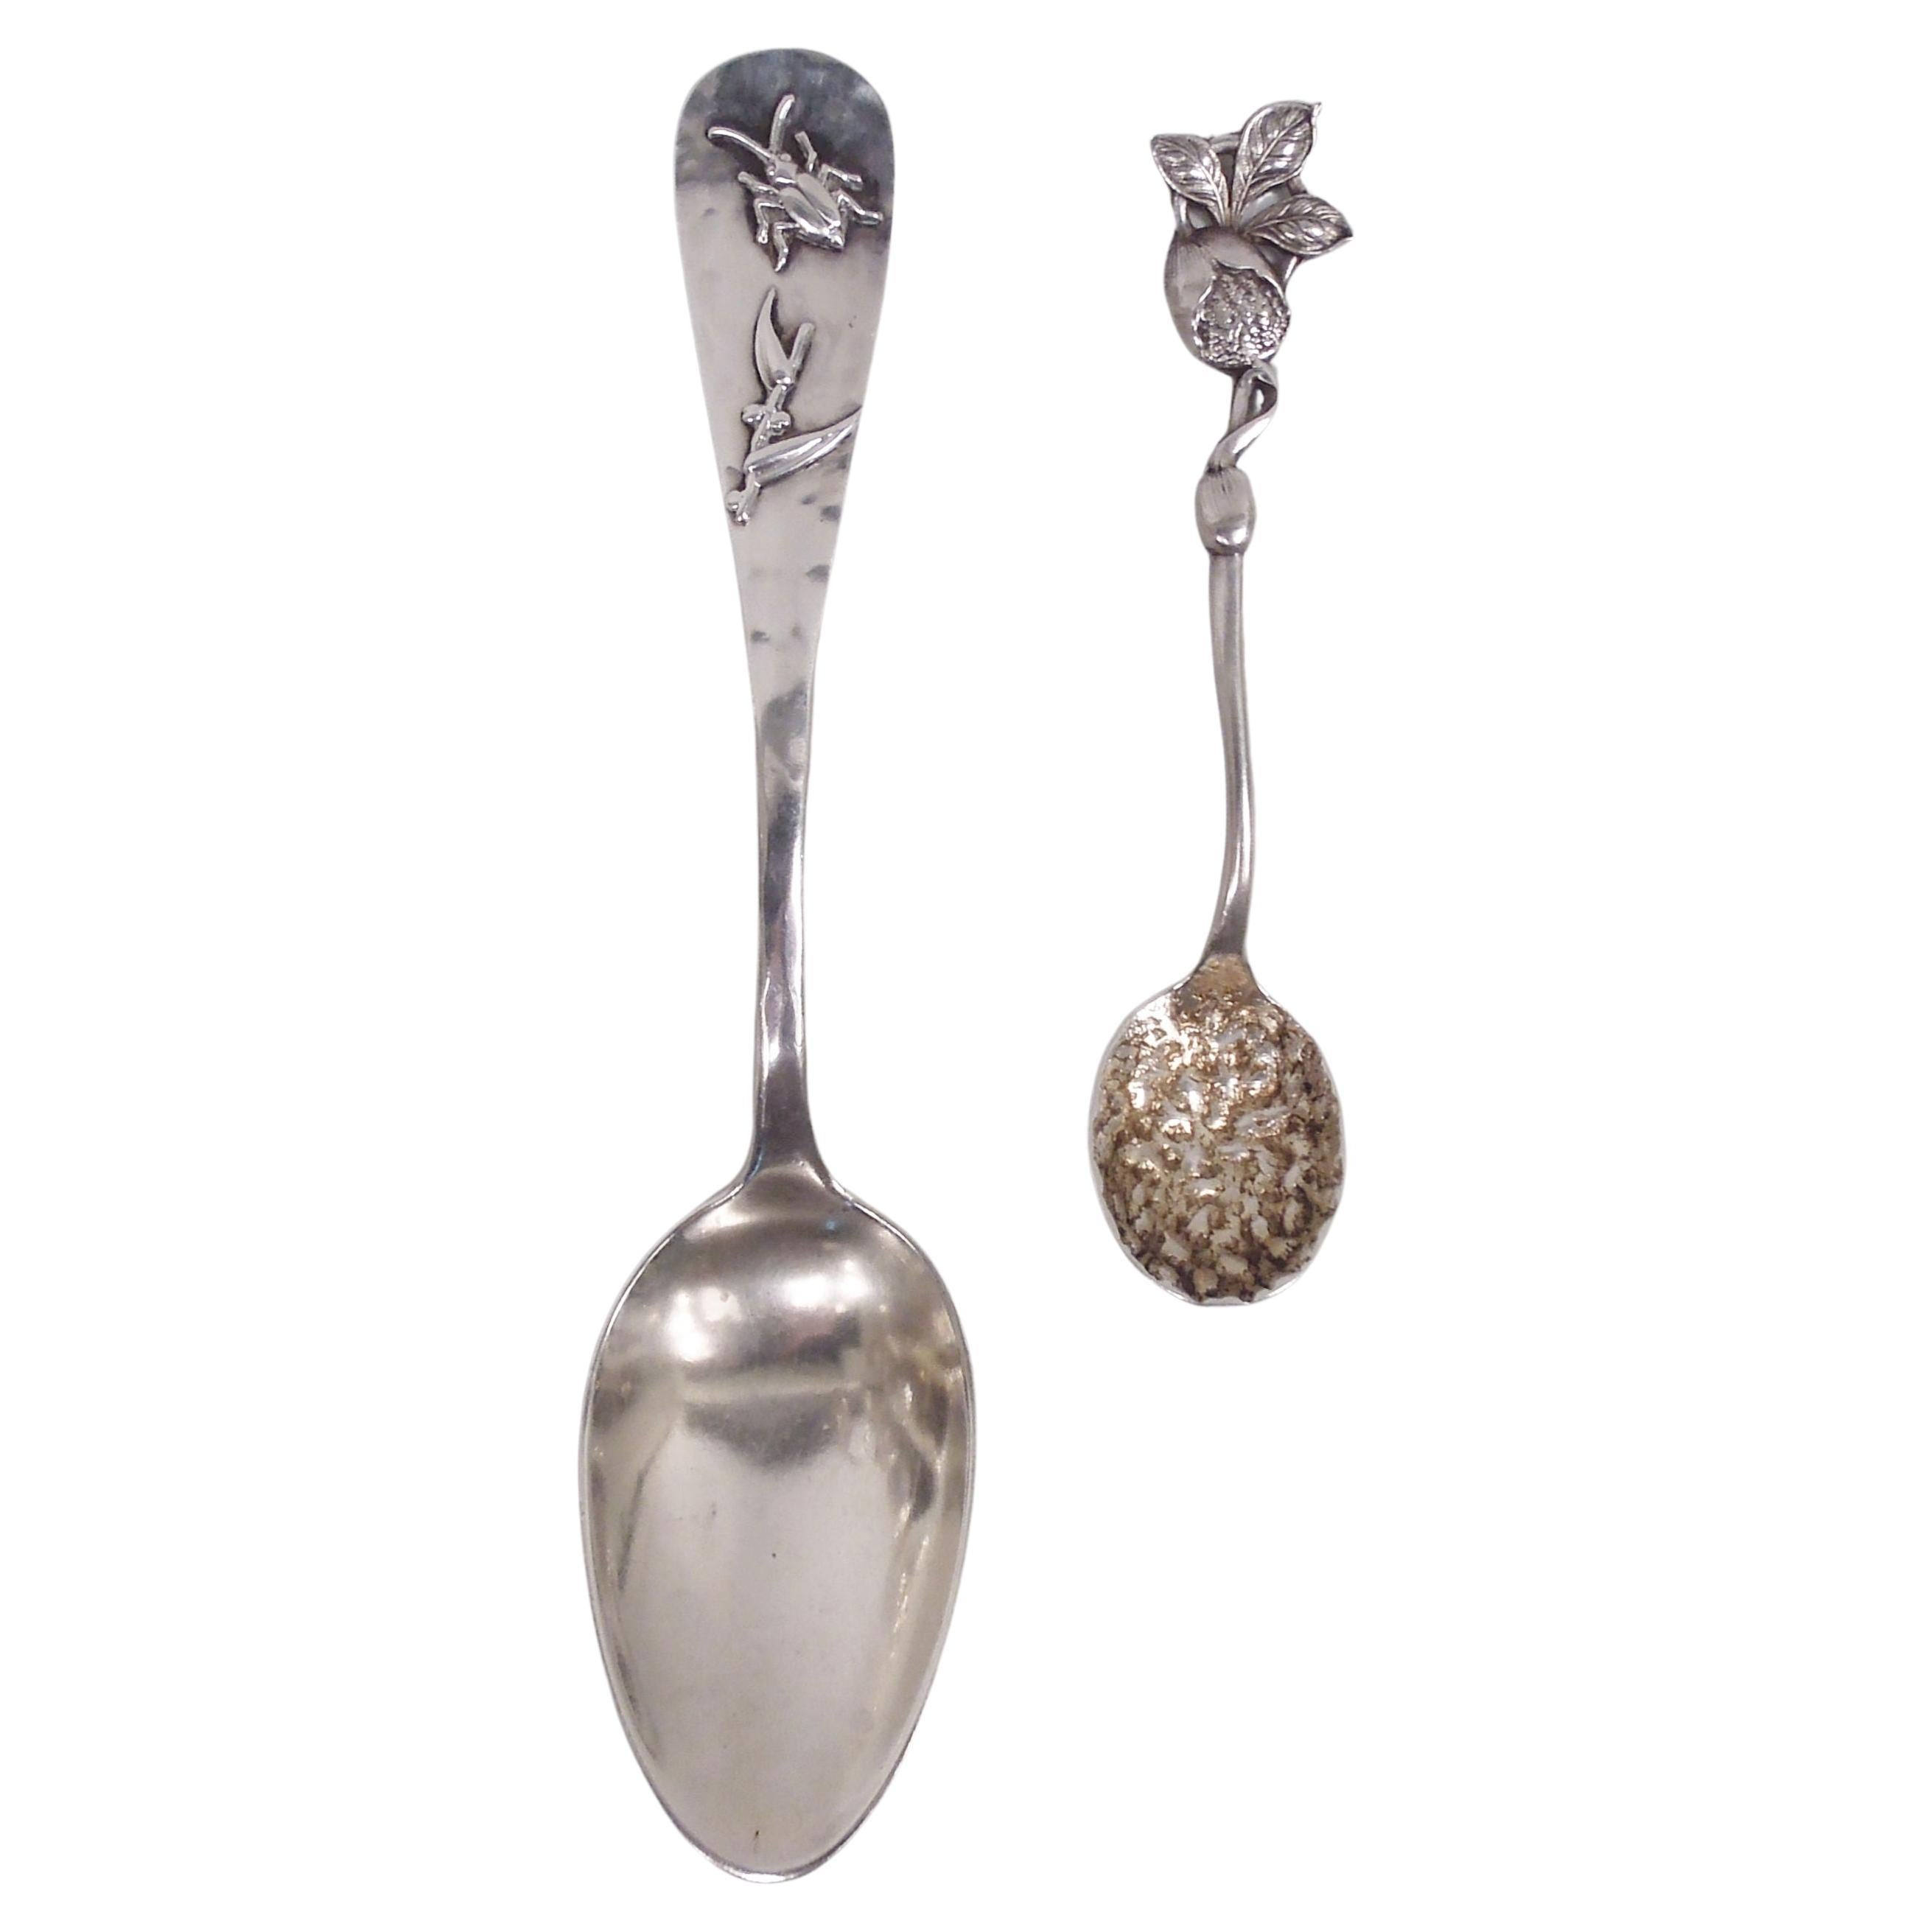 Two Antique Shiebler American Sterling Silver Novelty Spoons